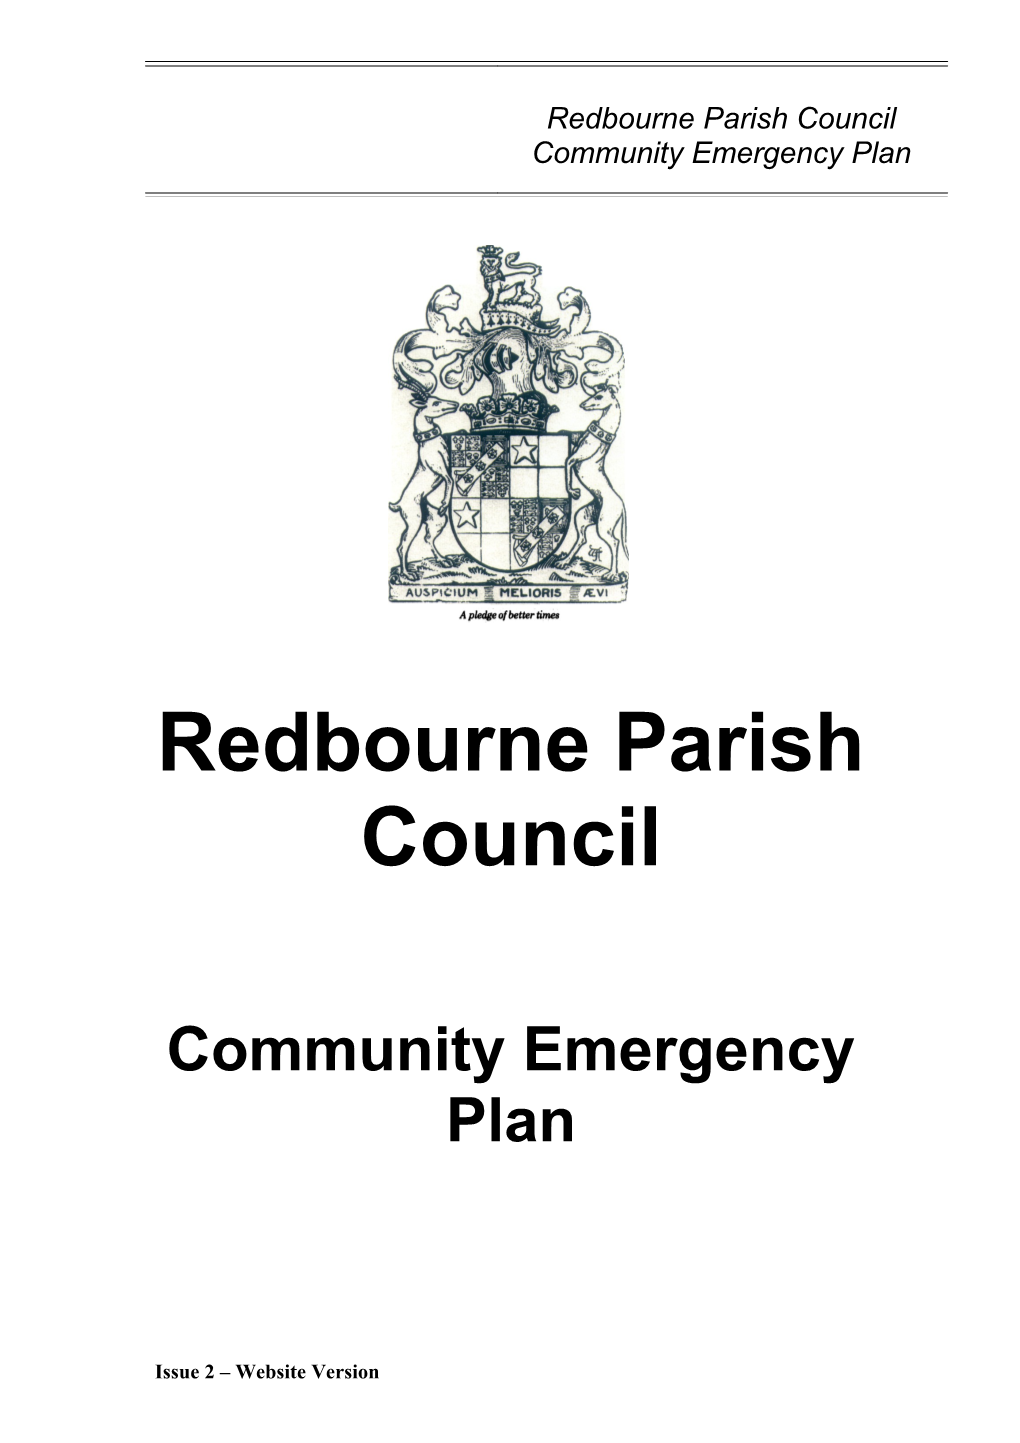 What Is the Purpose of This Community Emergency Preparedness Plan